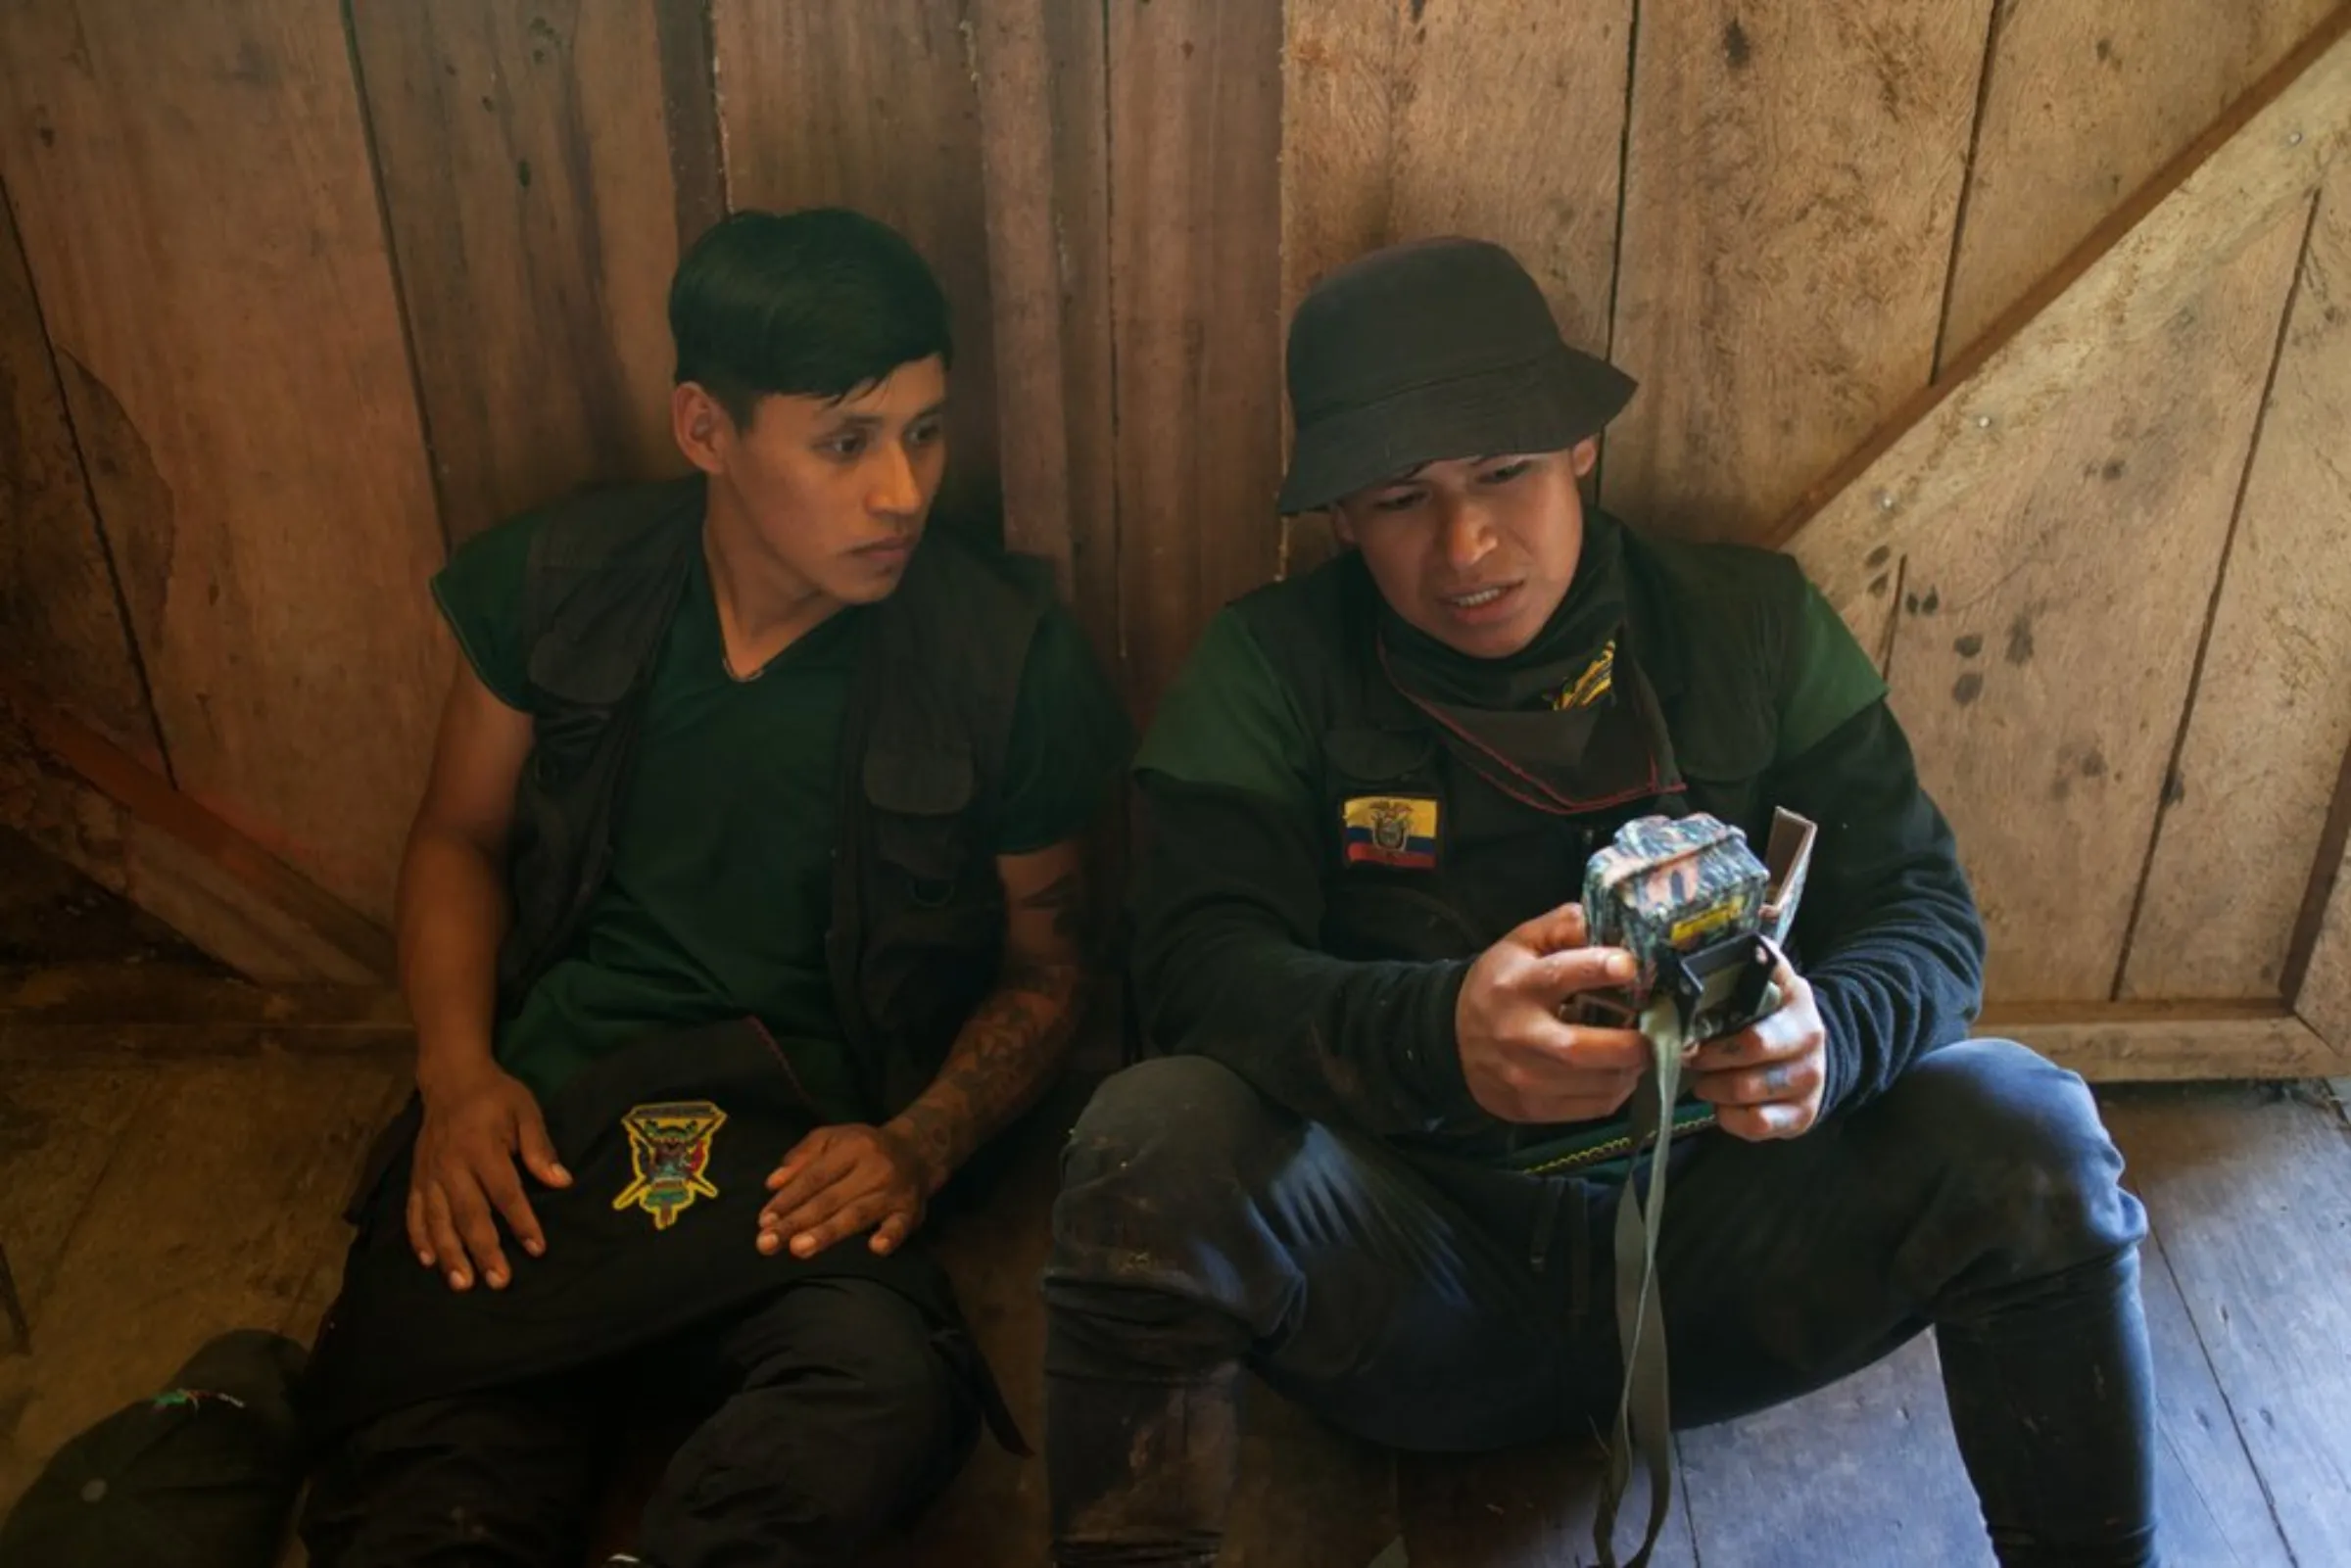 Marcelo Lucitante, a member of the Cofan indigenous guard, shows a fellow guard member footage from a camera trap used to record the passage of trespassing illegal gold miners, in Sinangoe, Ecuador, on April 21, 2022